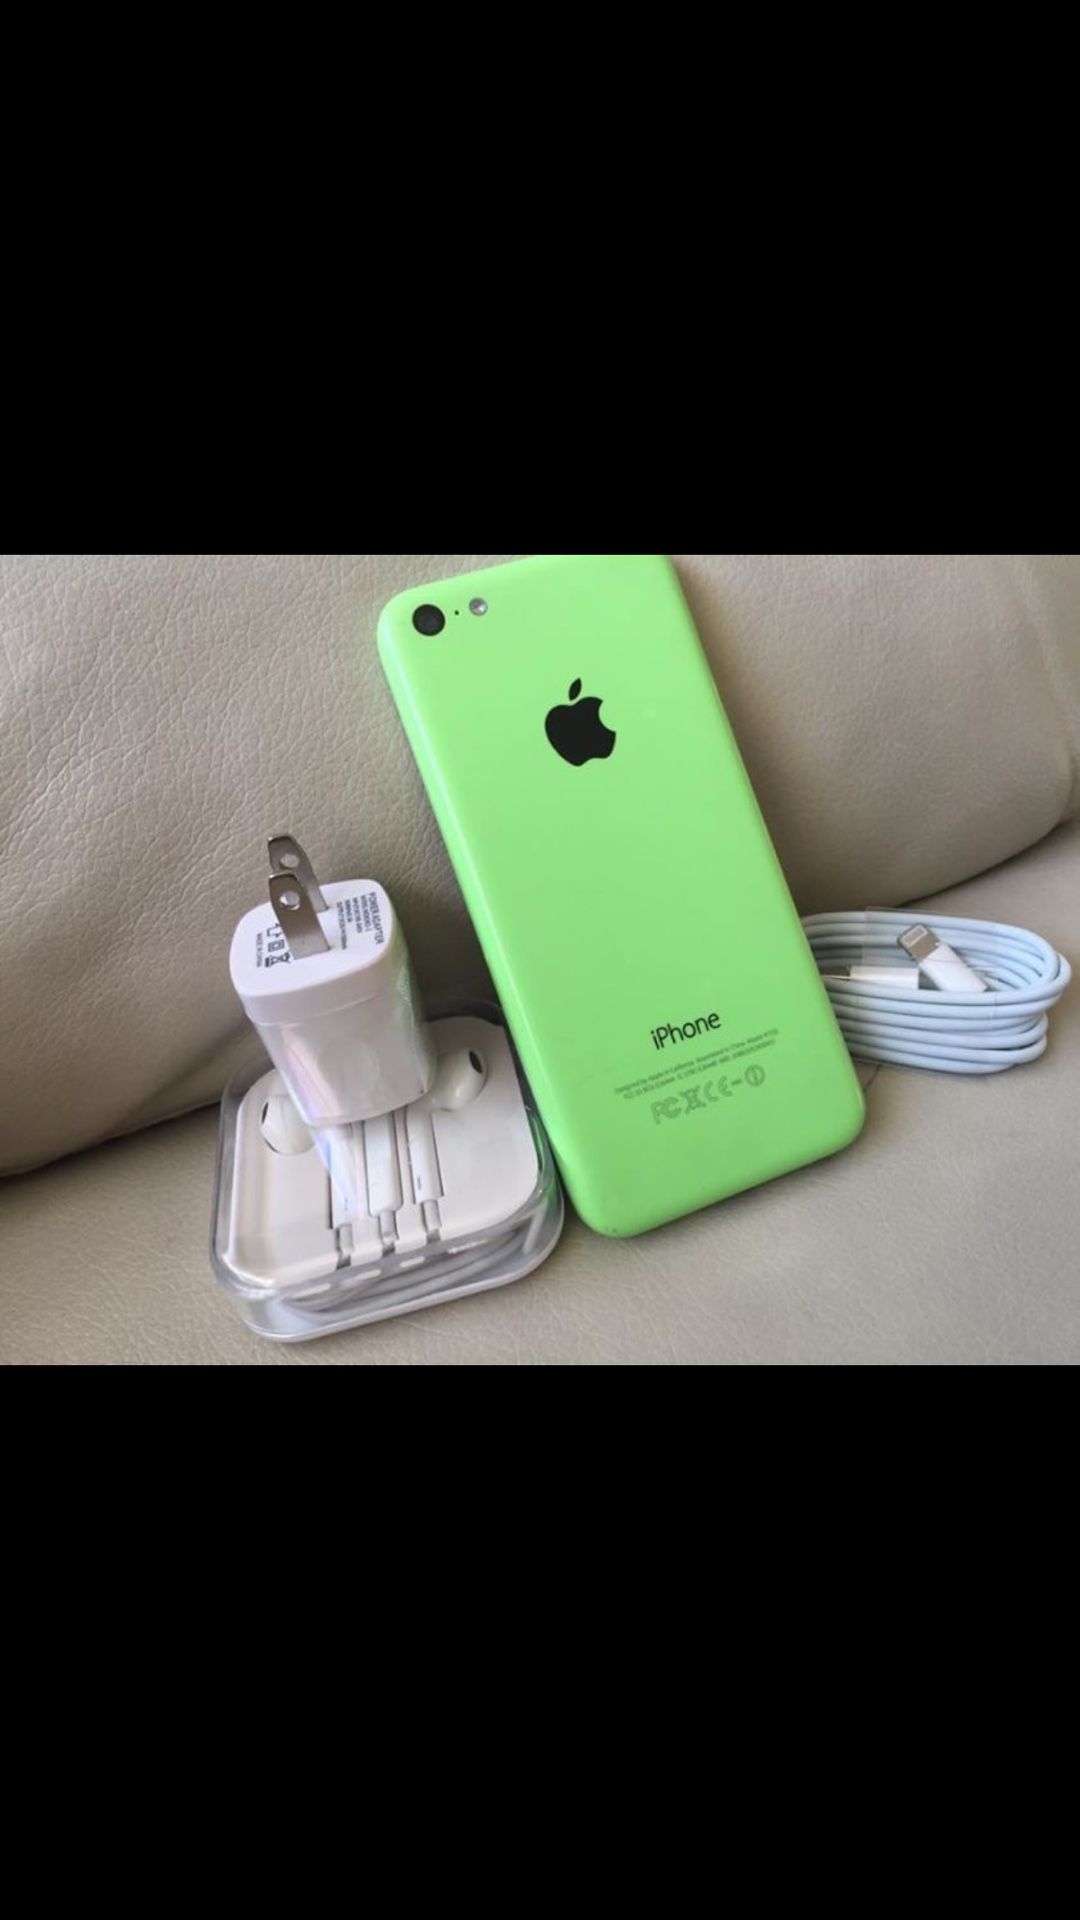 iPhone 5c excellent condition factory Unlocked